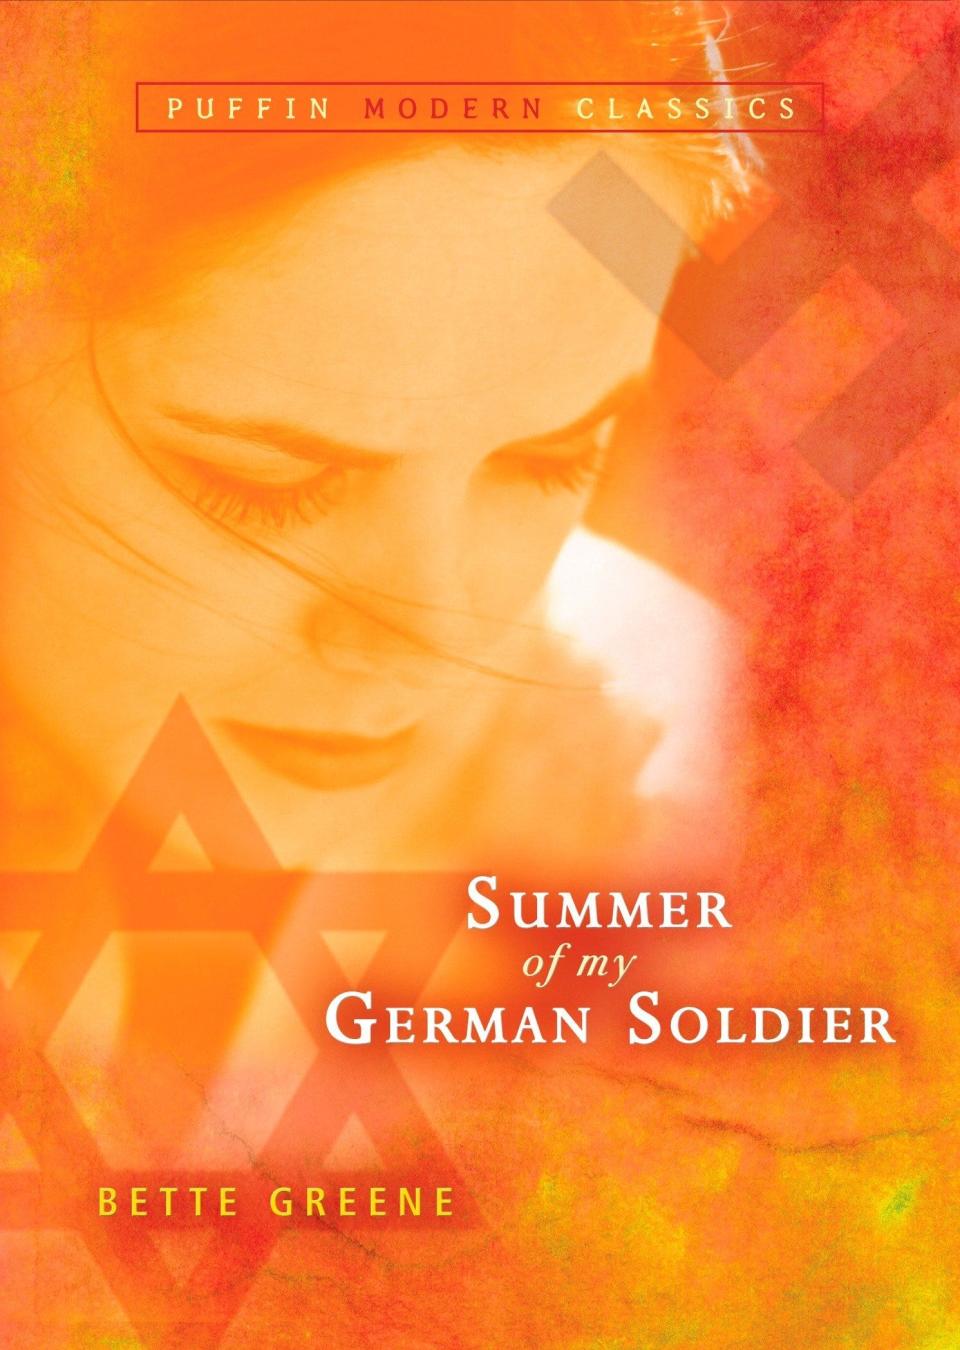 The current Puffin edition of "Summer of My German Soldier" affirms its reputation as a "Modern Classic."